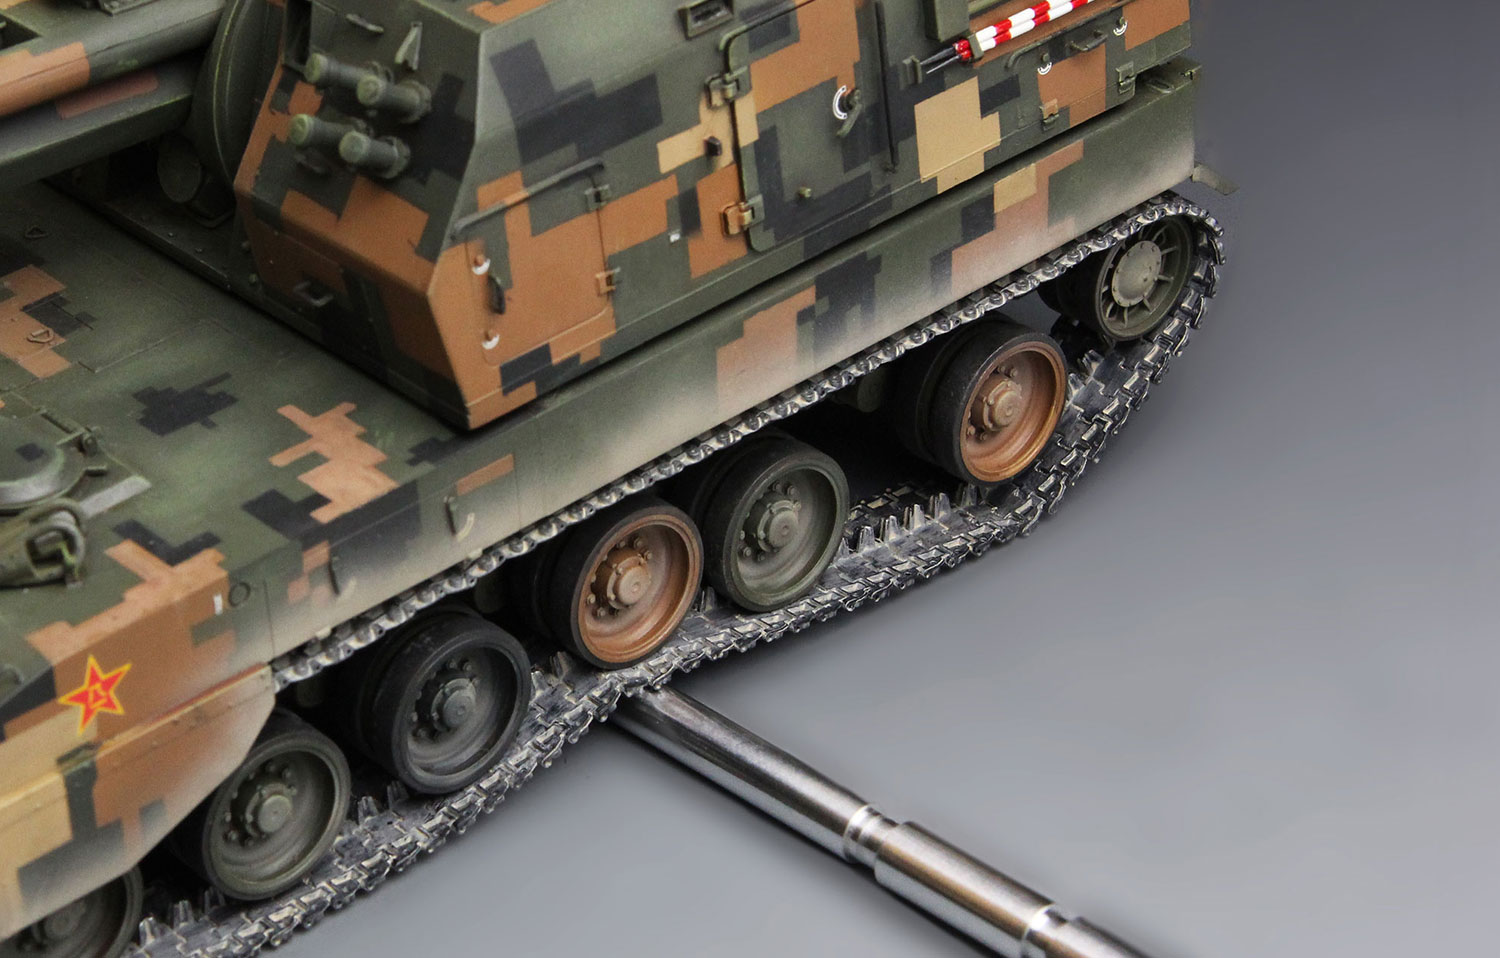 1/35 Scale PLZ05 Self-Propelled Howitzer Mask Improve Appearance for Meng TS-022 